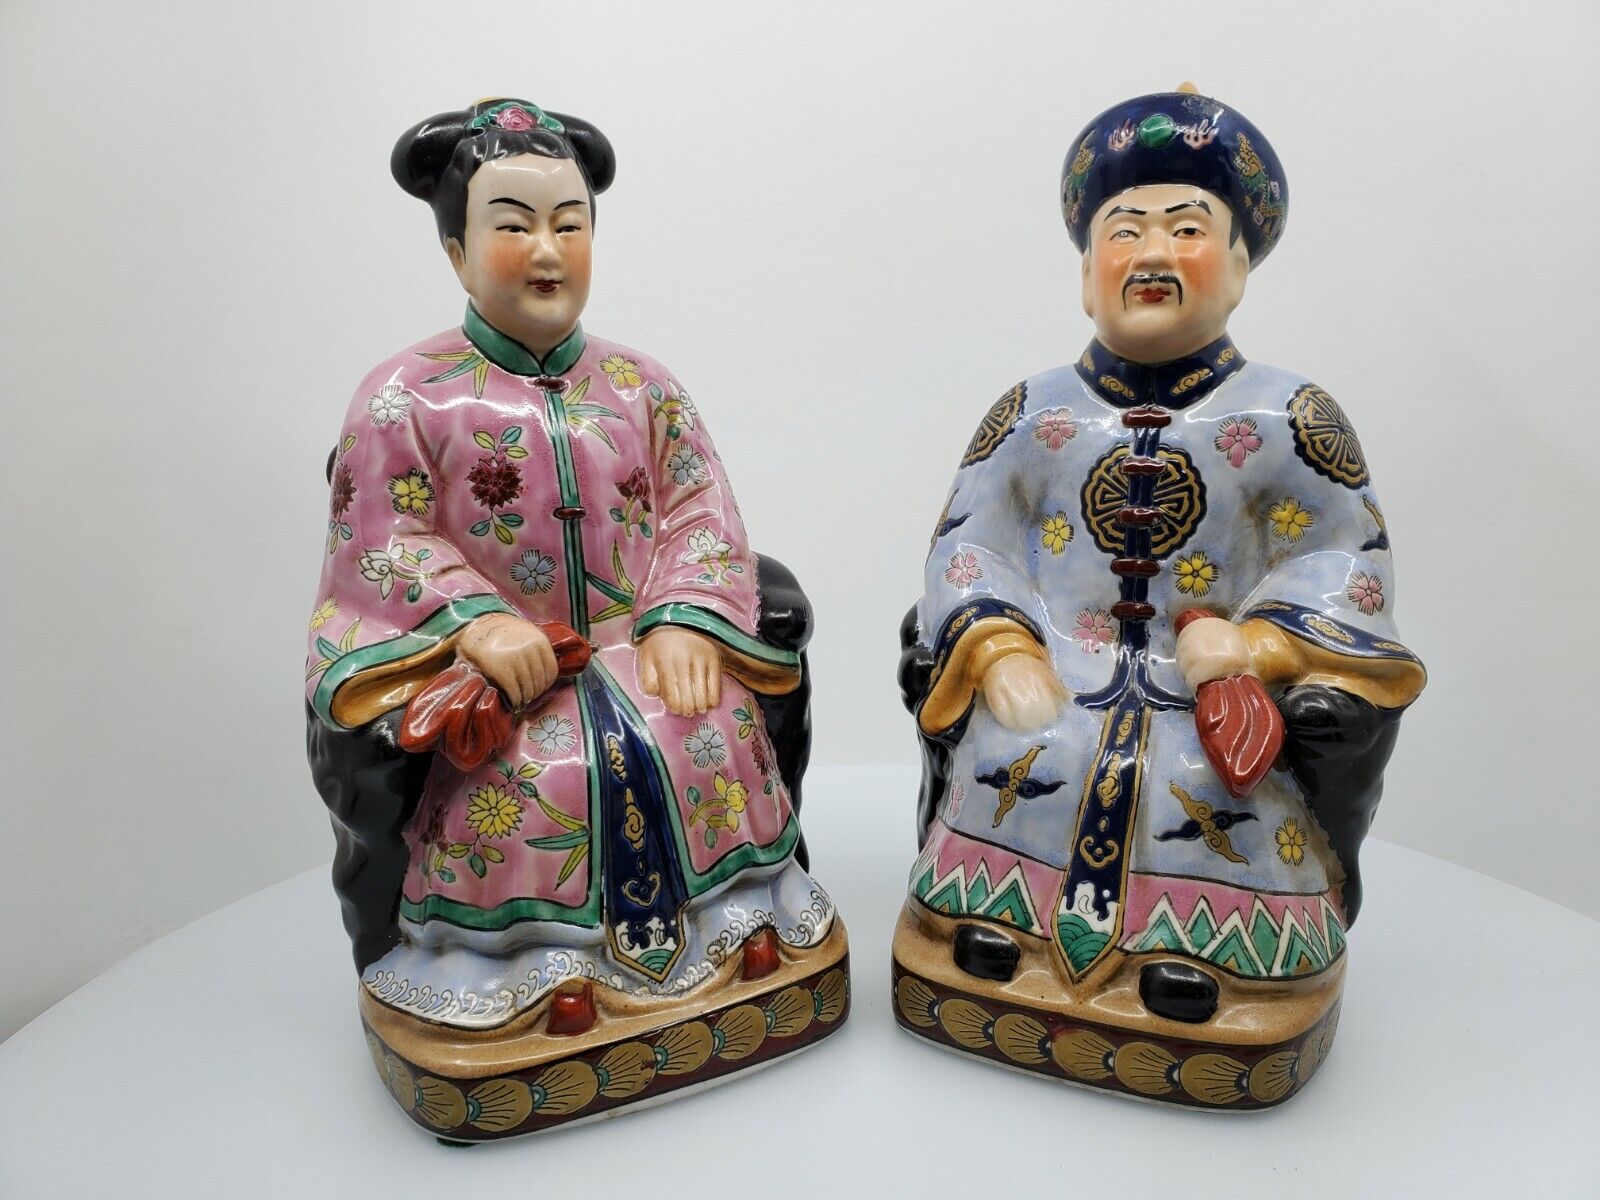 Vintage Chinese Figurines of a Man and Woman in Kimonos, Seated Noble Couple 